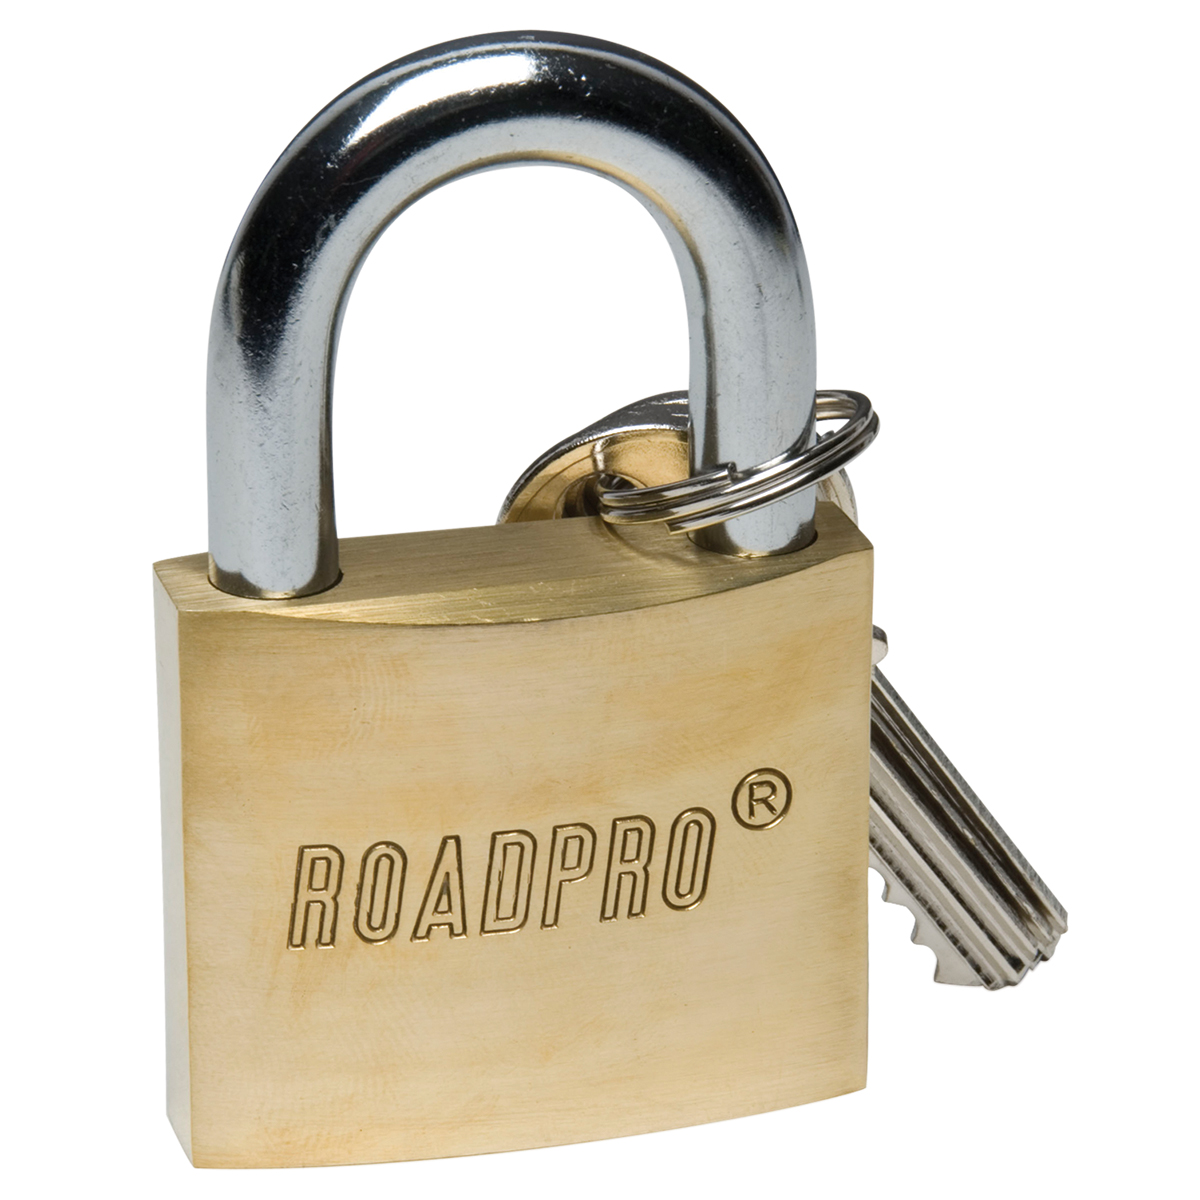 RoadPro 2 (50mm) Solid Brass Padlock with 1 Shackle